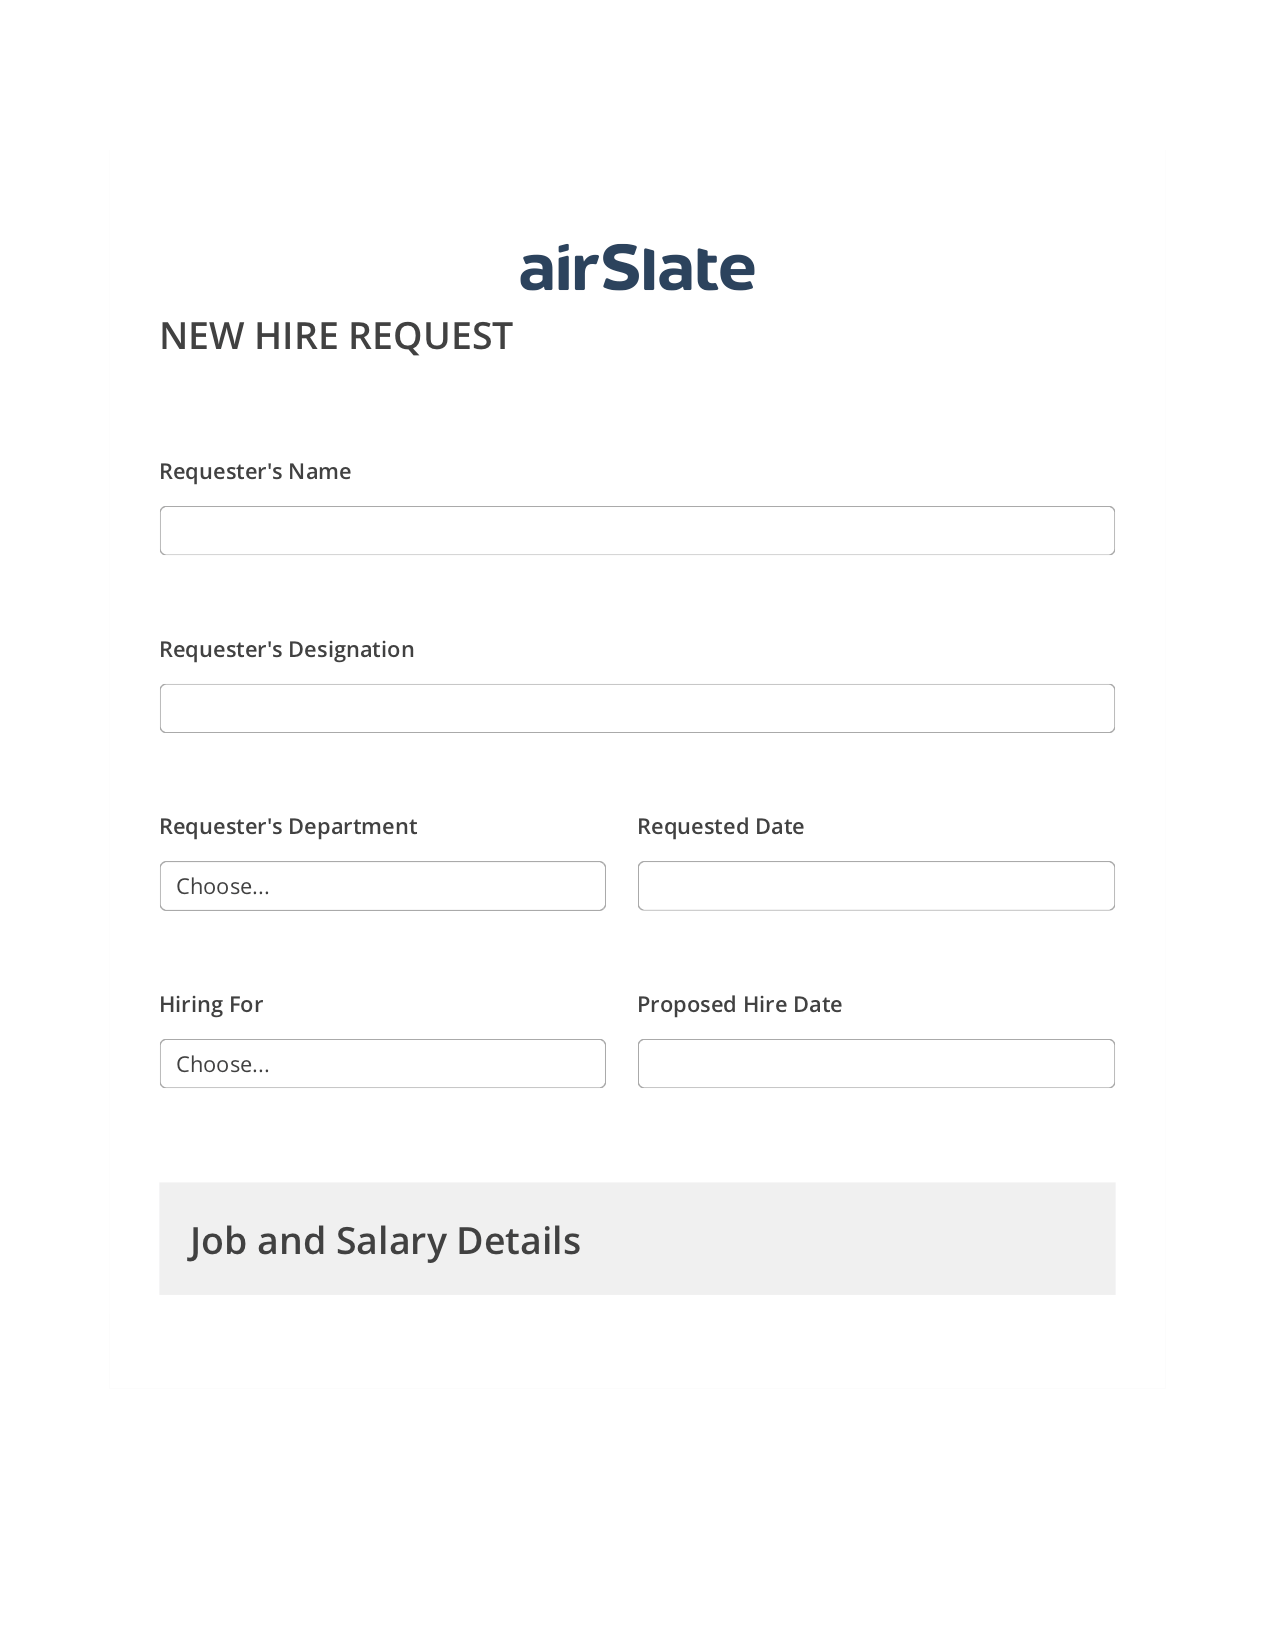 Multirole Hiring Request Workflow Pre-fill from Smartsheet Bot, Create Slate every Google Sheet Update Bot, Export to Excel 365 Bot